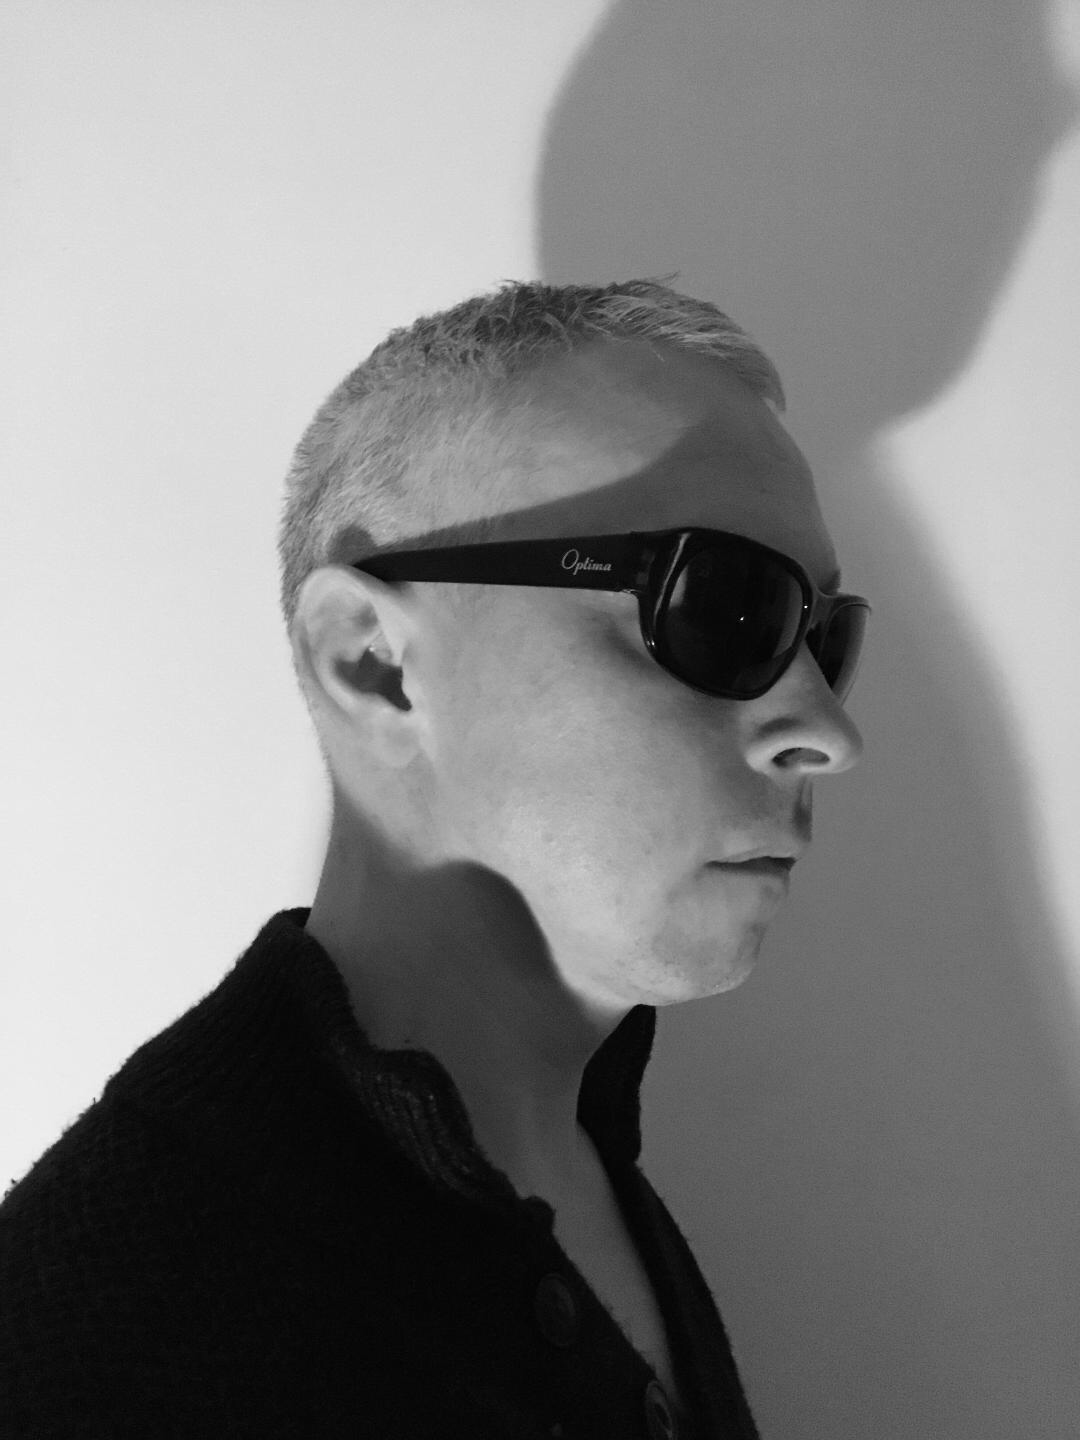 An artistic black-and-white photo of Clarke wearing a black shirt and black glasses. His shadow is cast at an upward angle on the white wall behind him.